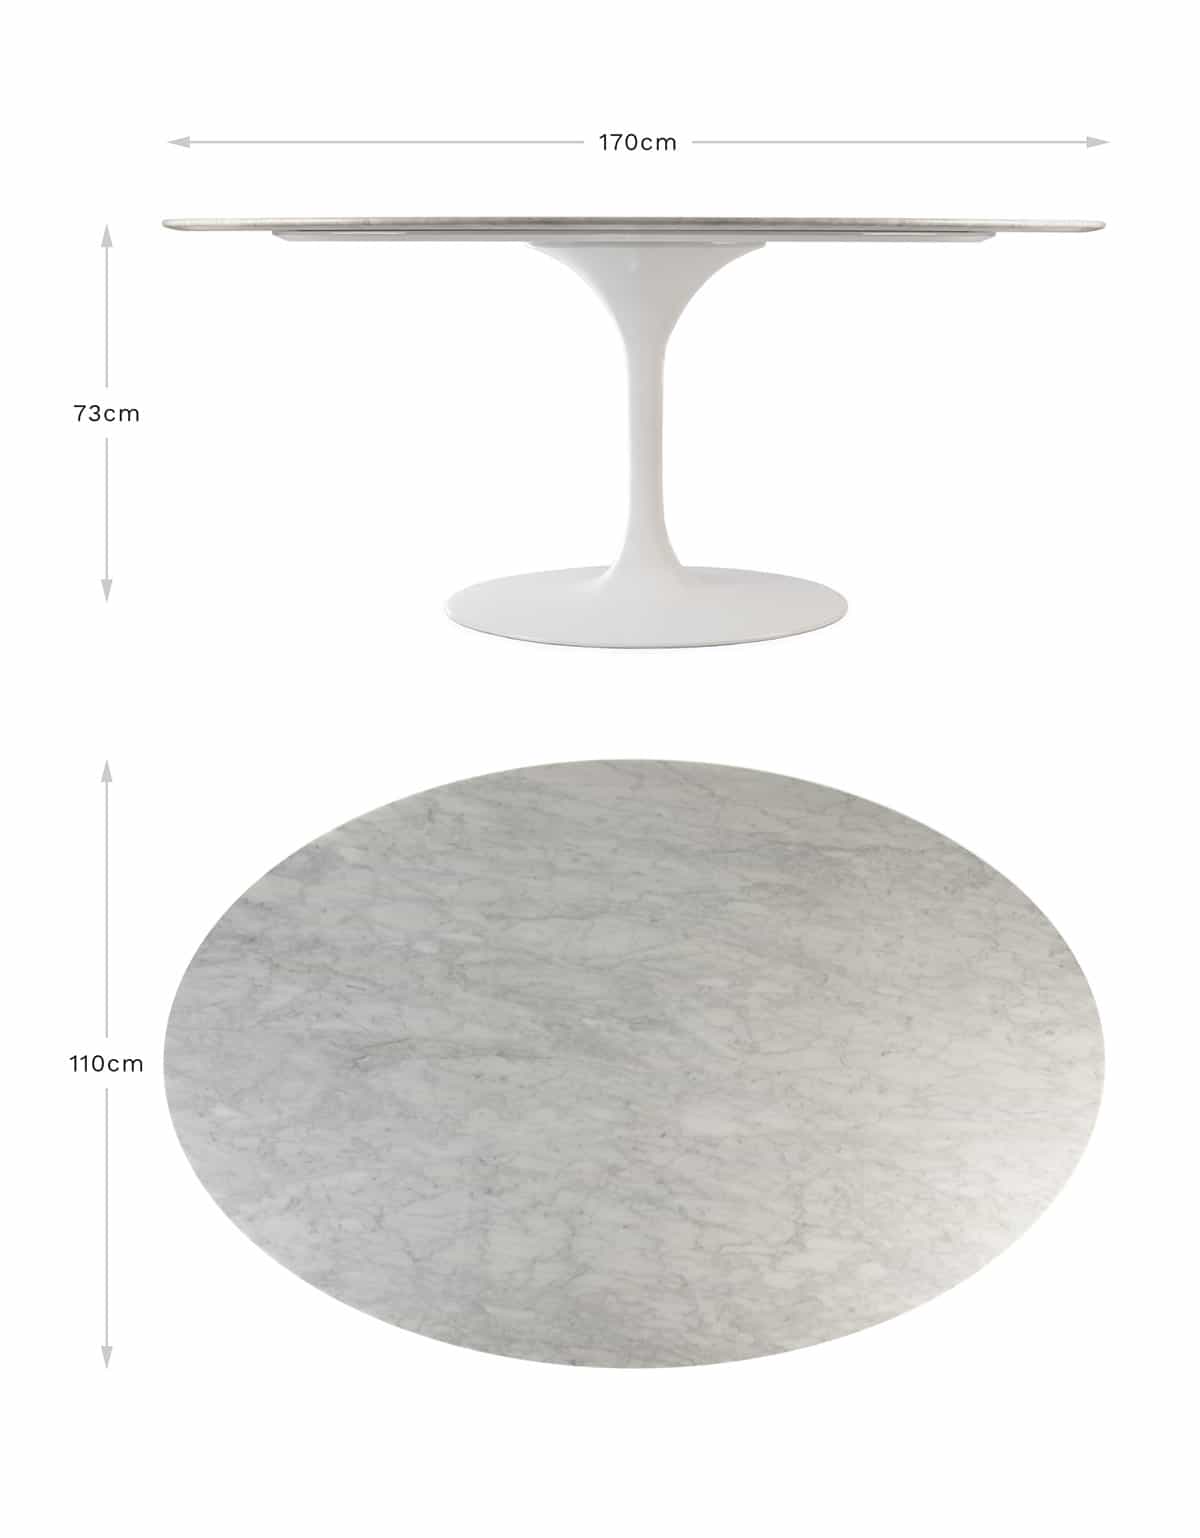 Adjusted for mobile & tablet, a top down & straight on view of the 170 x 110 cm oval Saarinen Tulip Table showing visual dimensions for the product